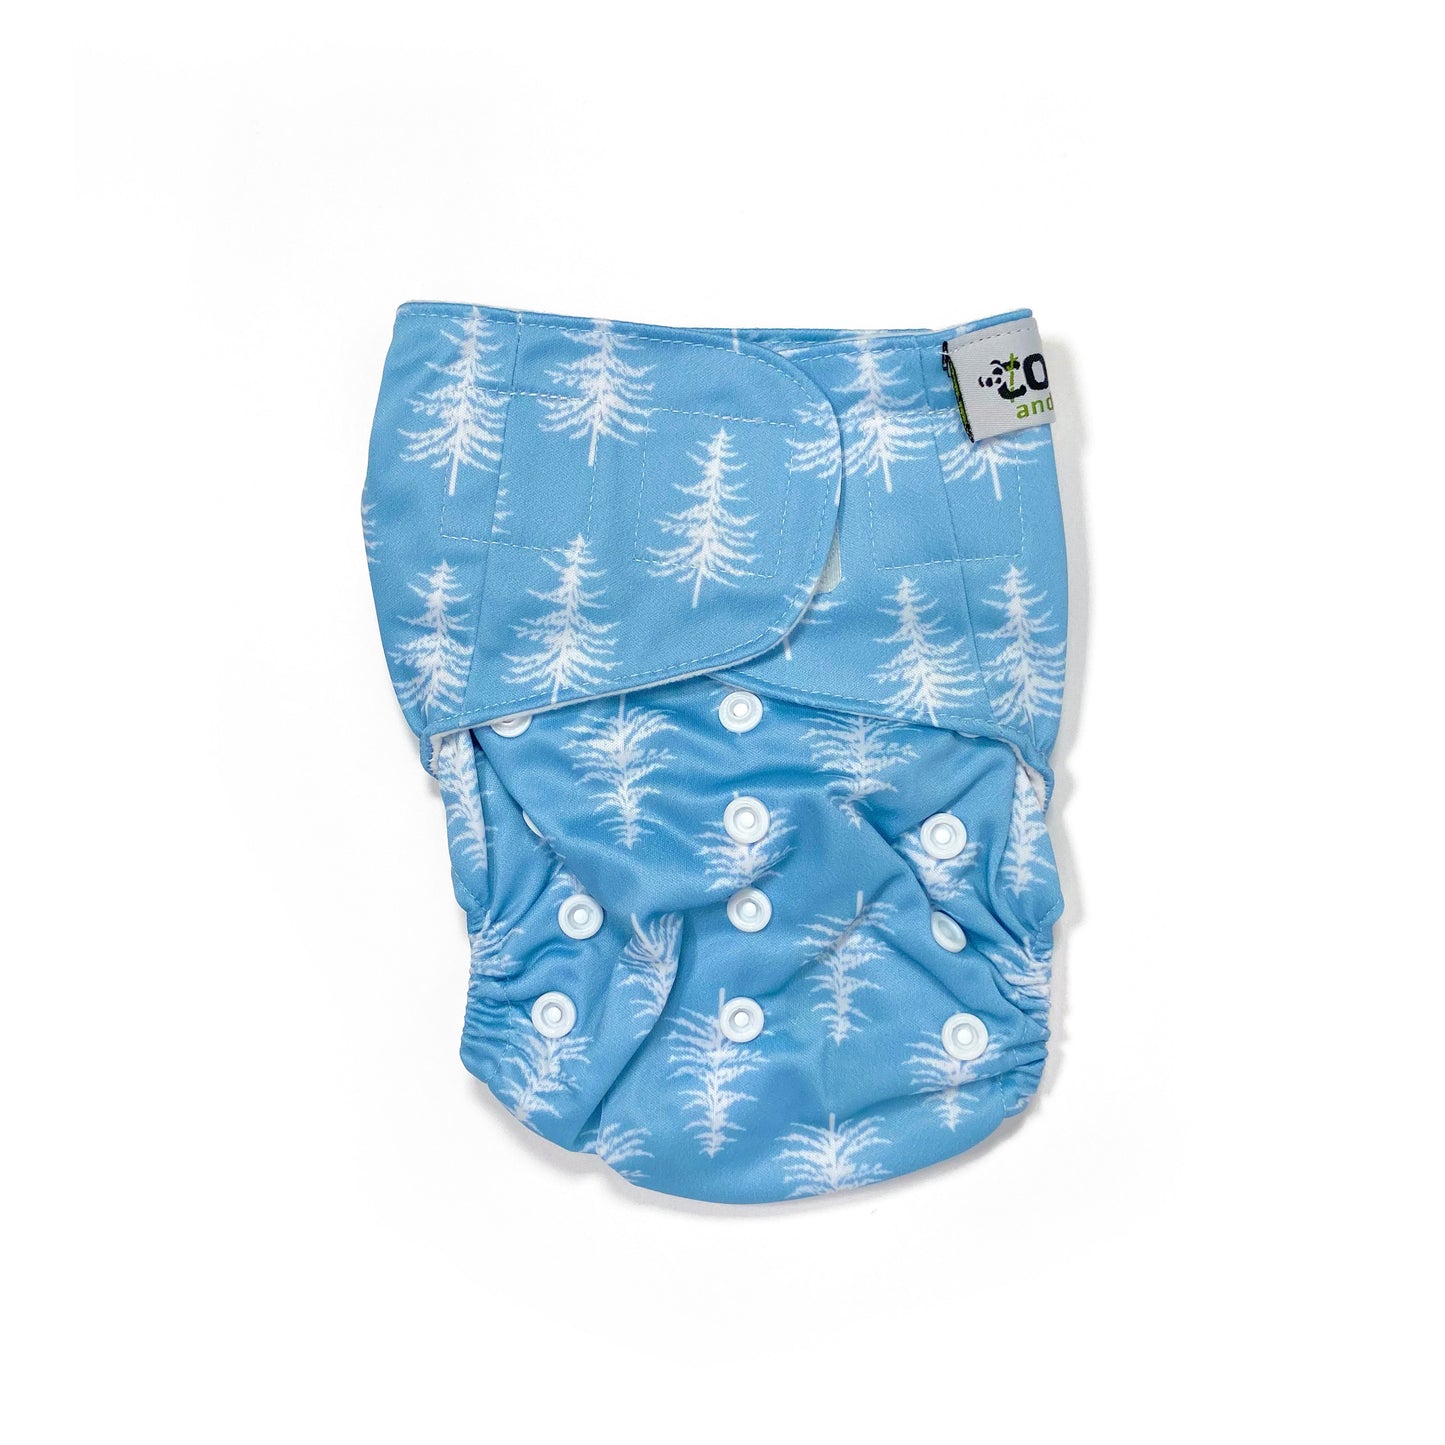 An adjustable reusable nappy for babies and toddlers, featuring a cool blue pine design design, with images of white pine trees on a blue background. View shows the front of the nappy, with fastenings closed.